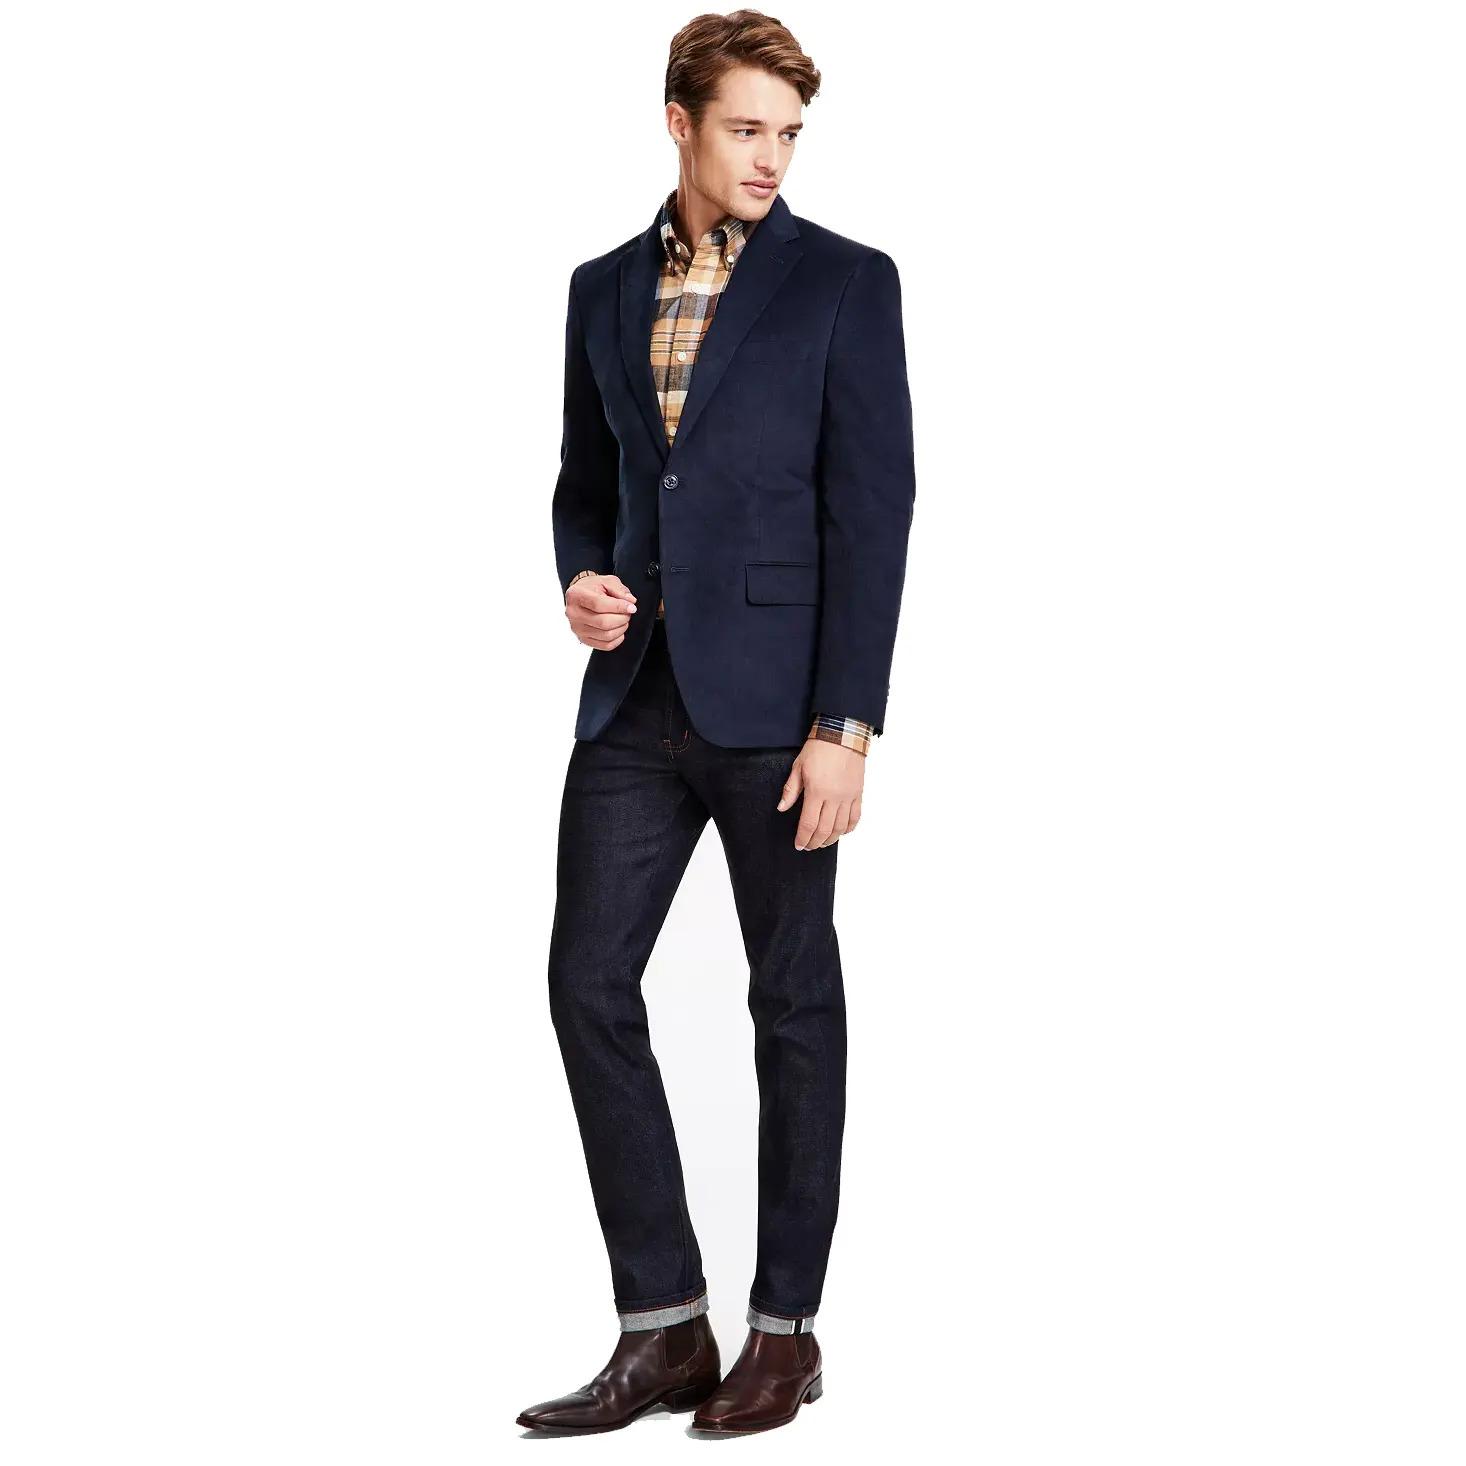 Tommy Hilfiger Modern-Fit Corduroy Sport Coat for $31.49 Shipped